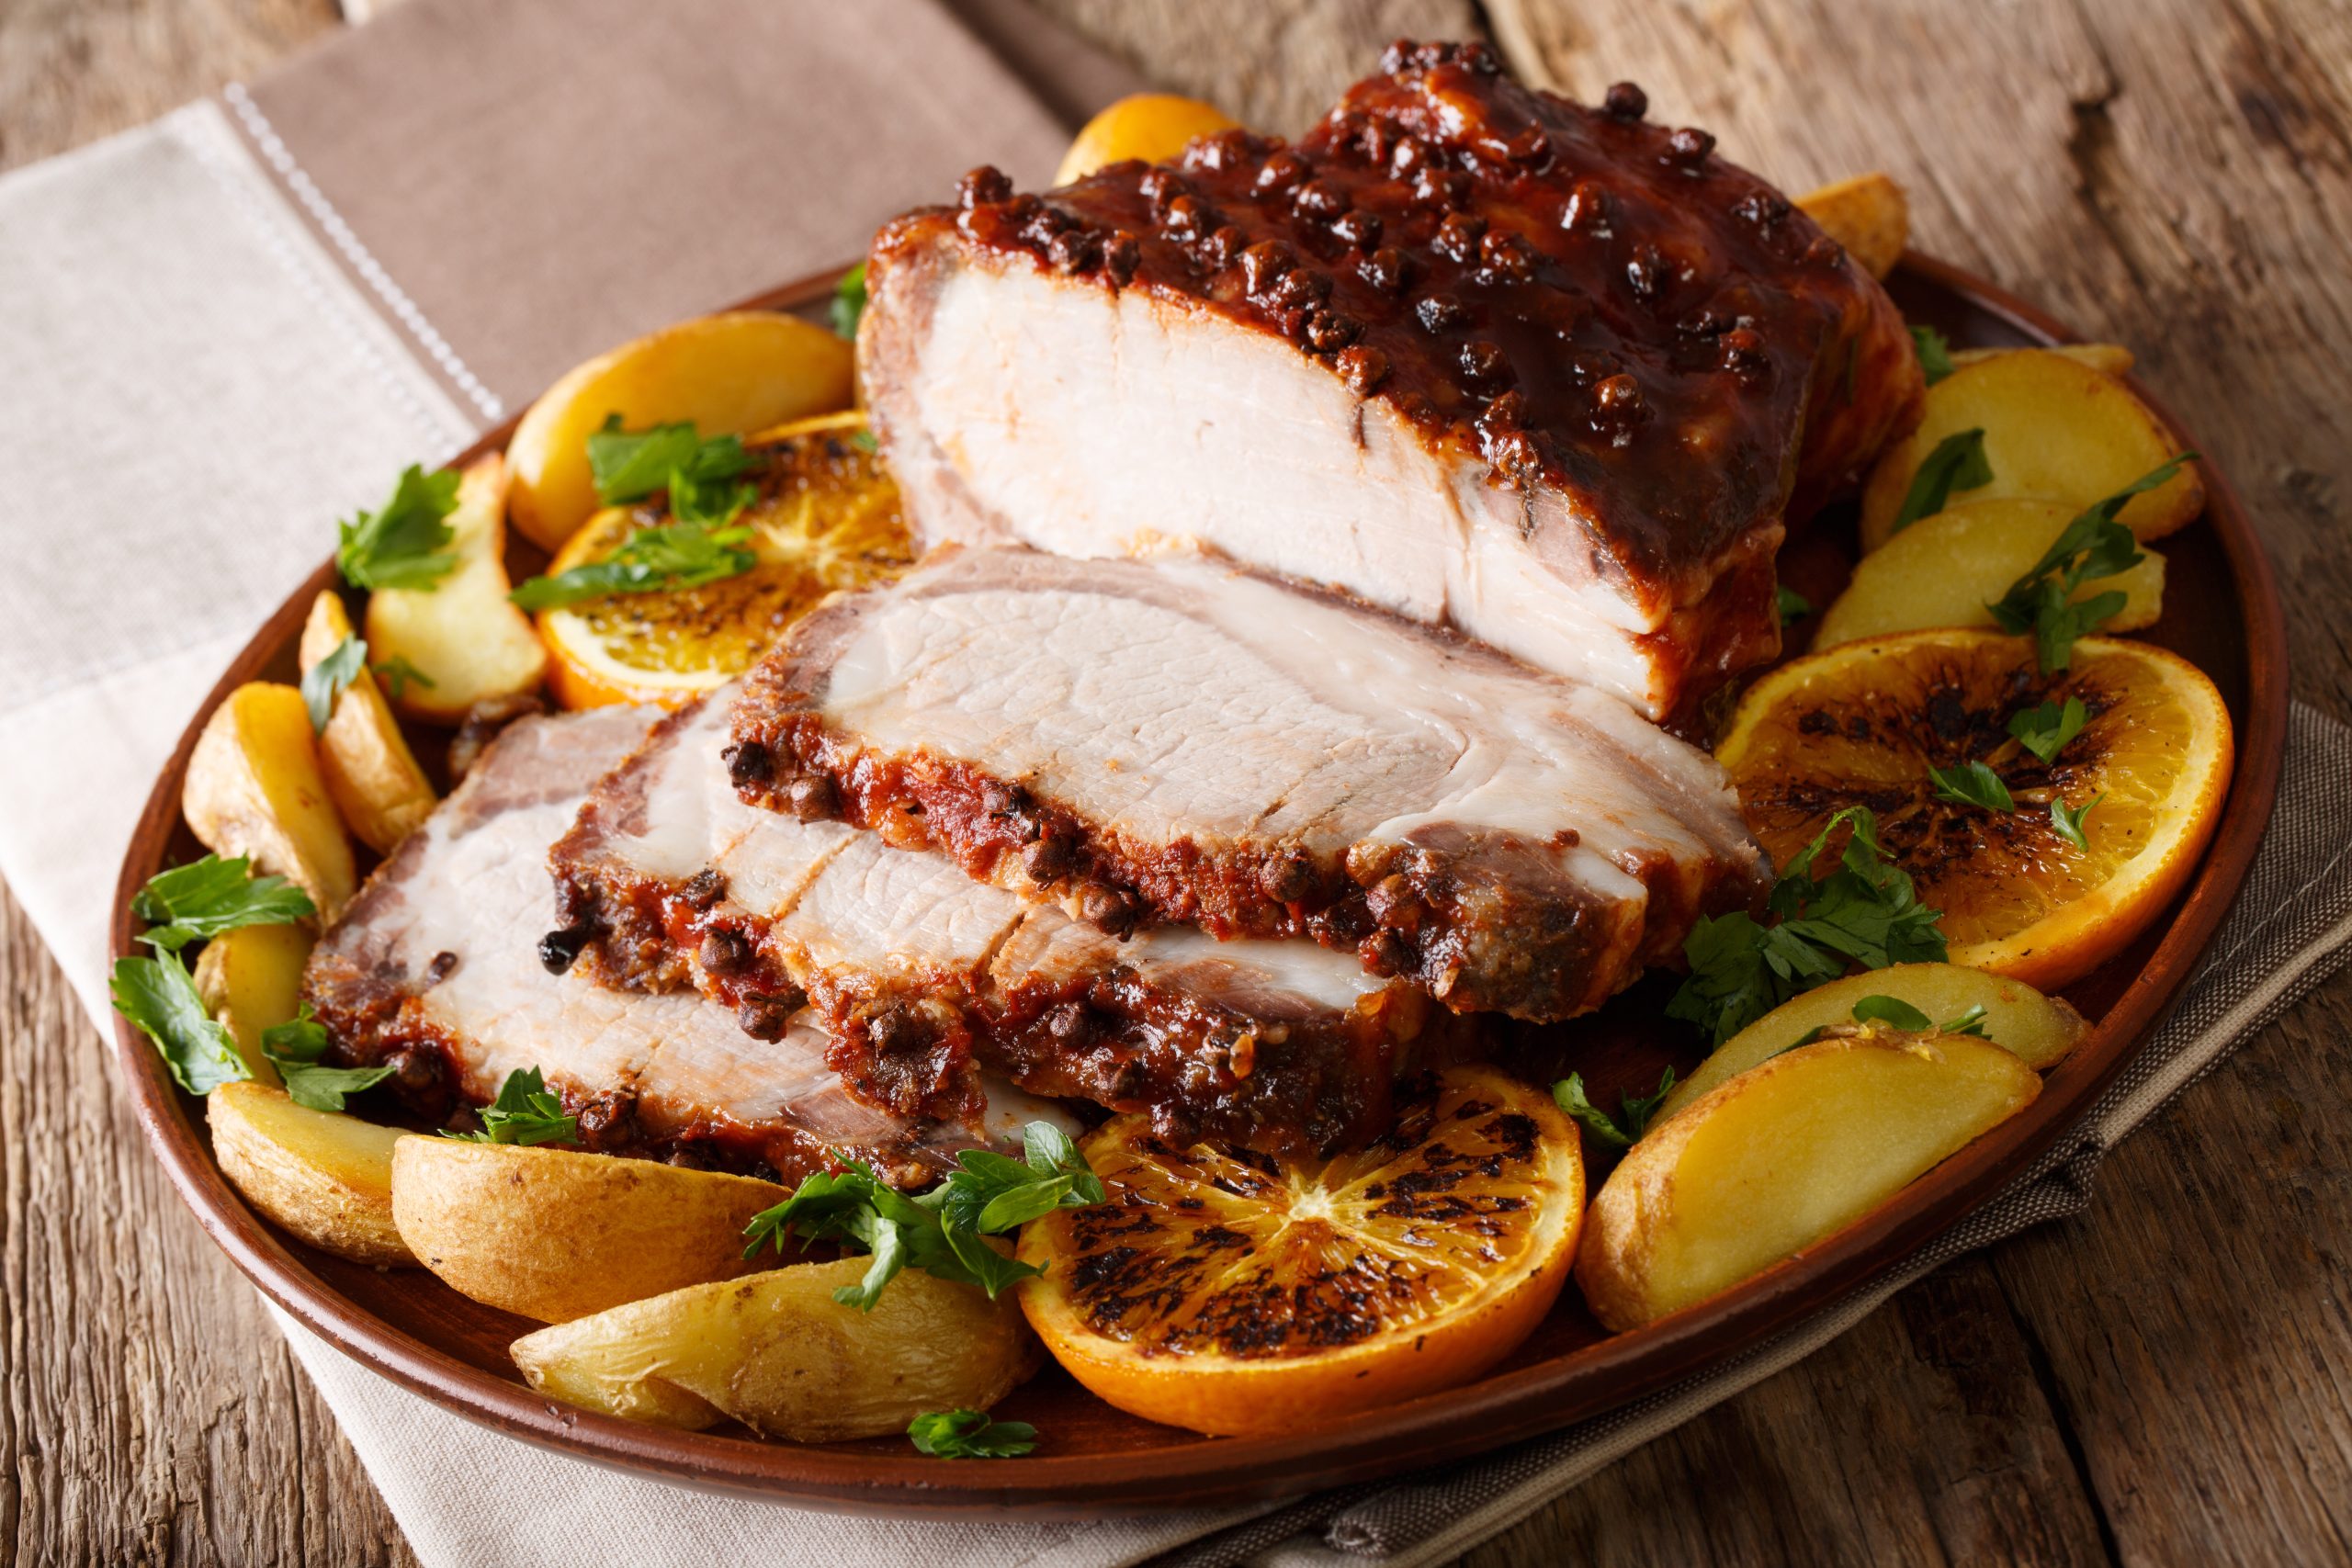 Christmas baked ham chopped slices with potatoes, oranges and apples close-up on a plate.  